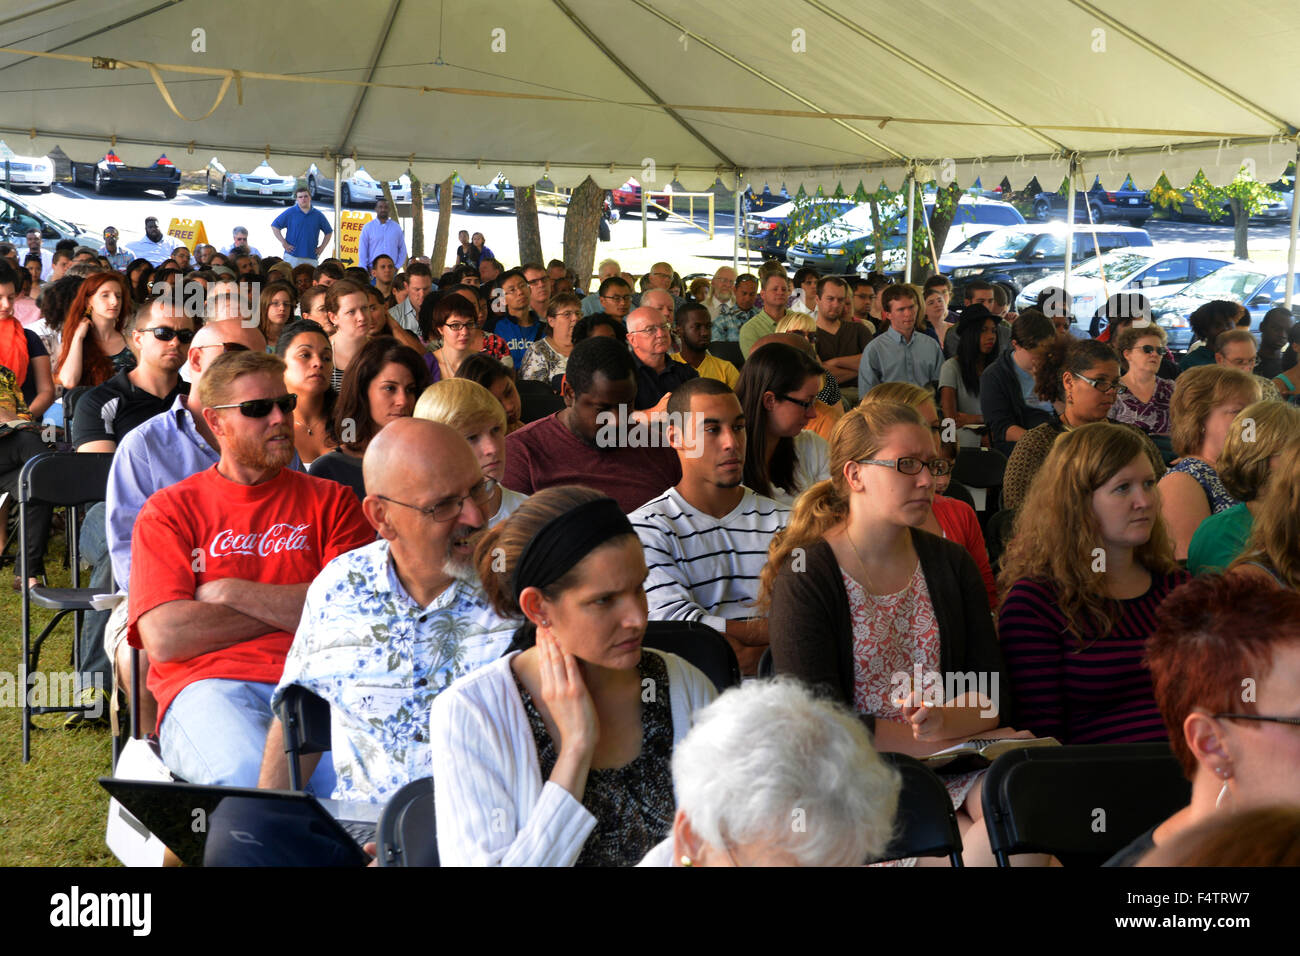 church service in a tent Stock Photo